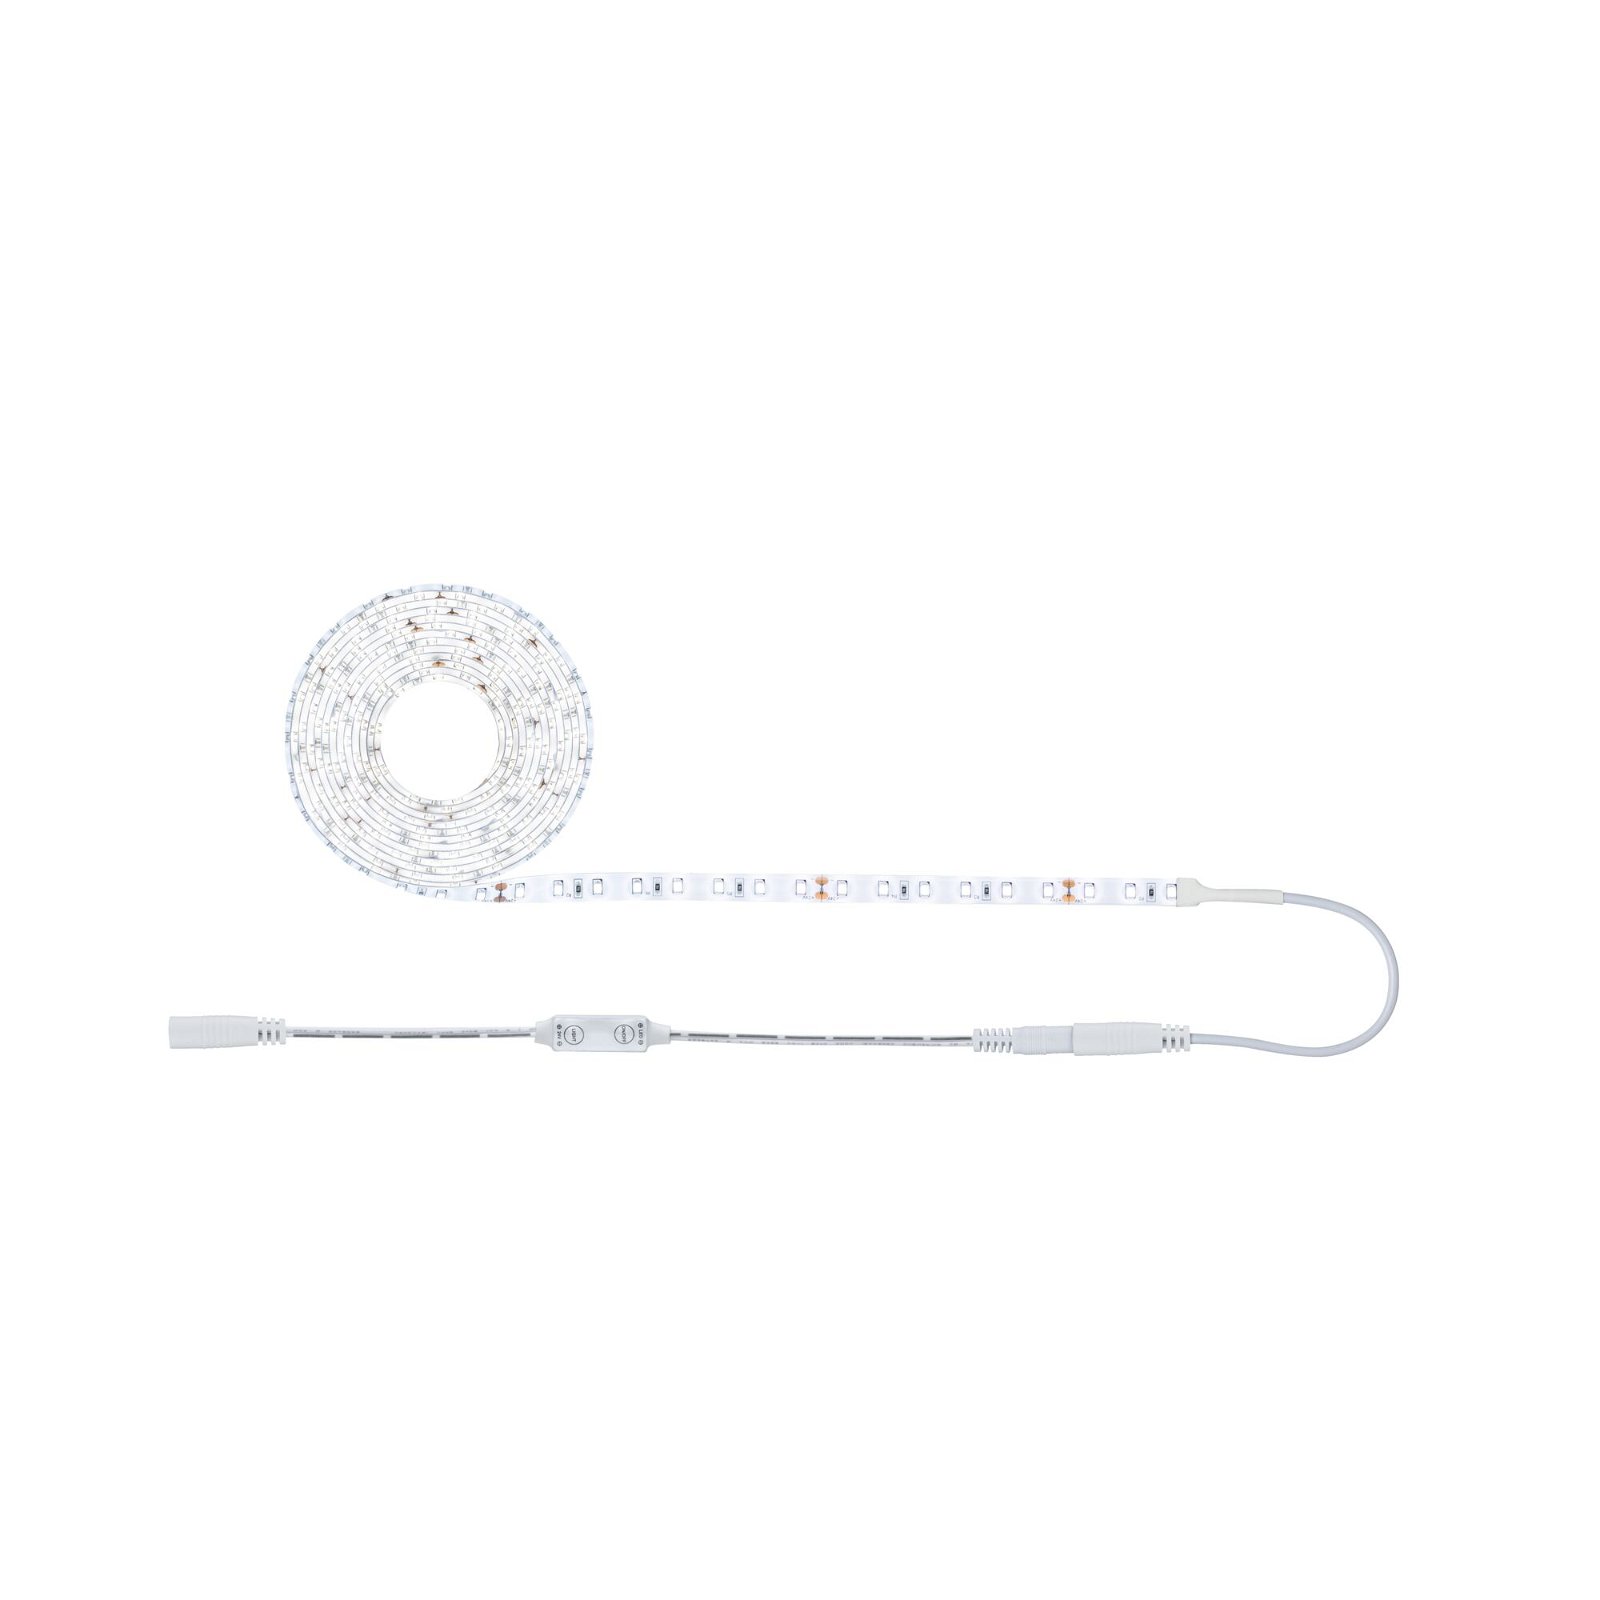 SimpLED Power LED Strip Neutral white incl. Dimm/Switch Complete set 3m  protect cover 33W 1060lm/